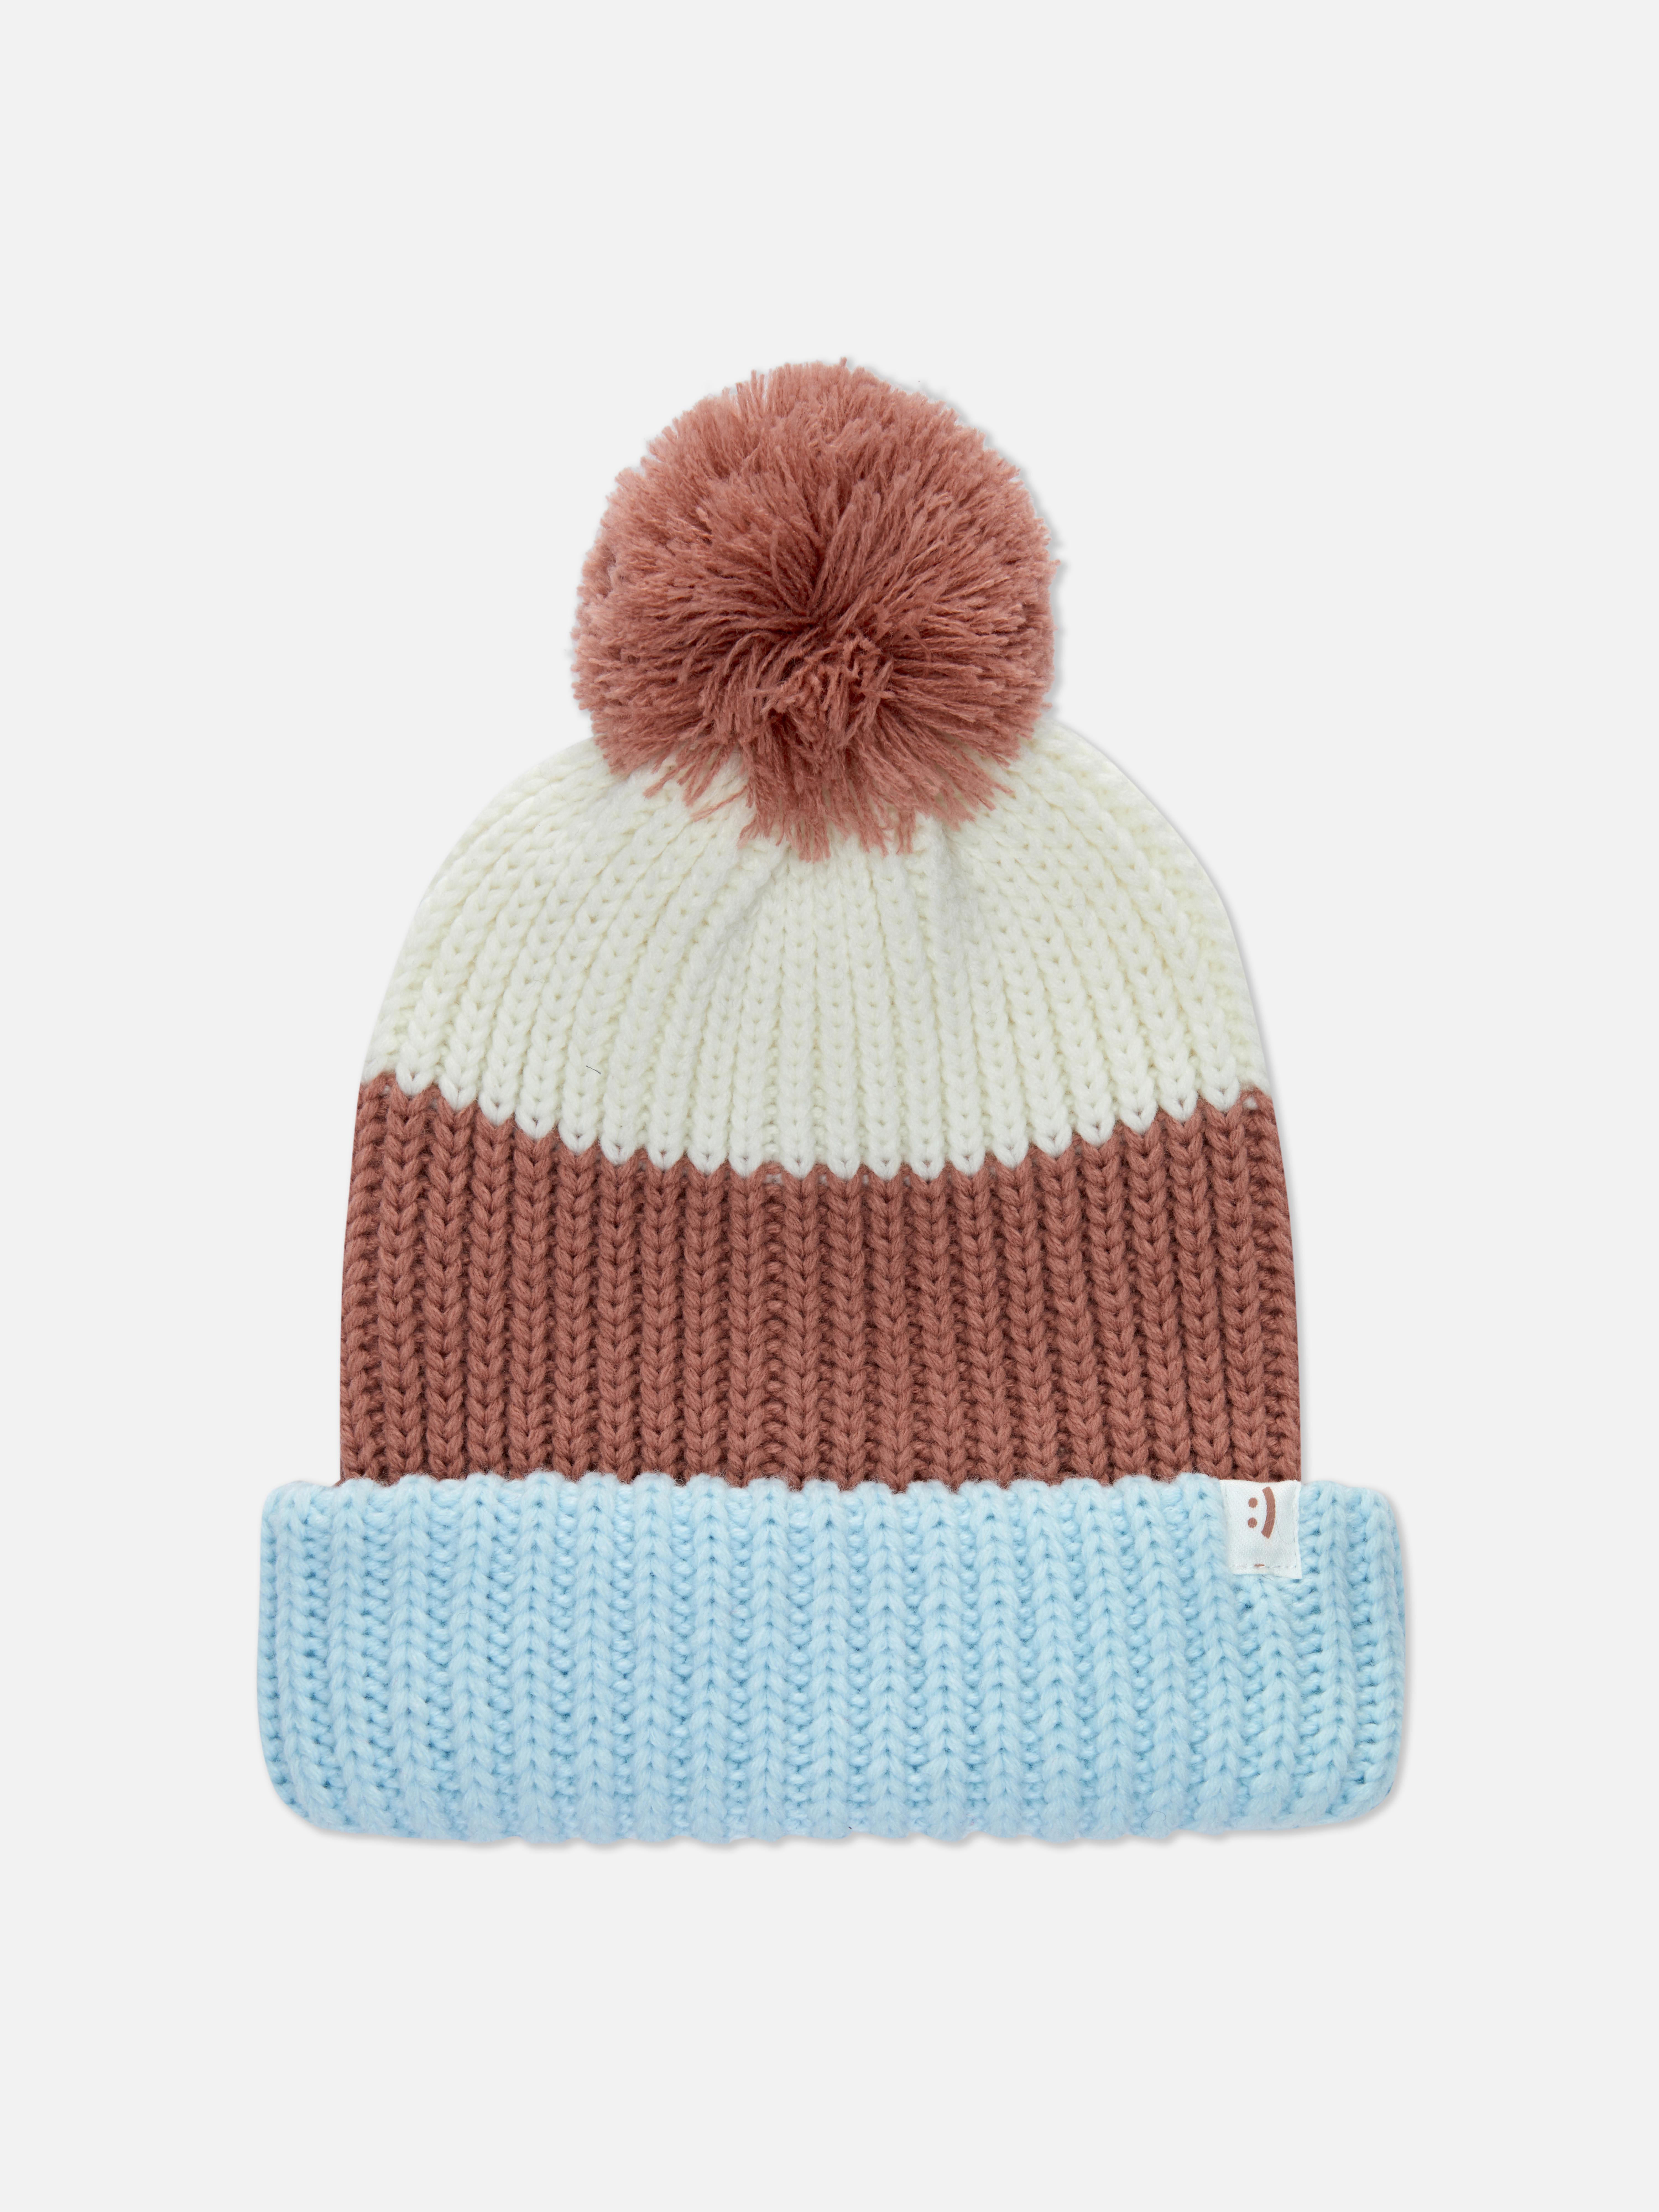 Stacey Solomon Knitted Pompom Beanie